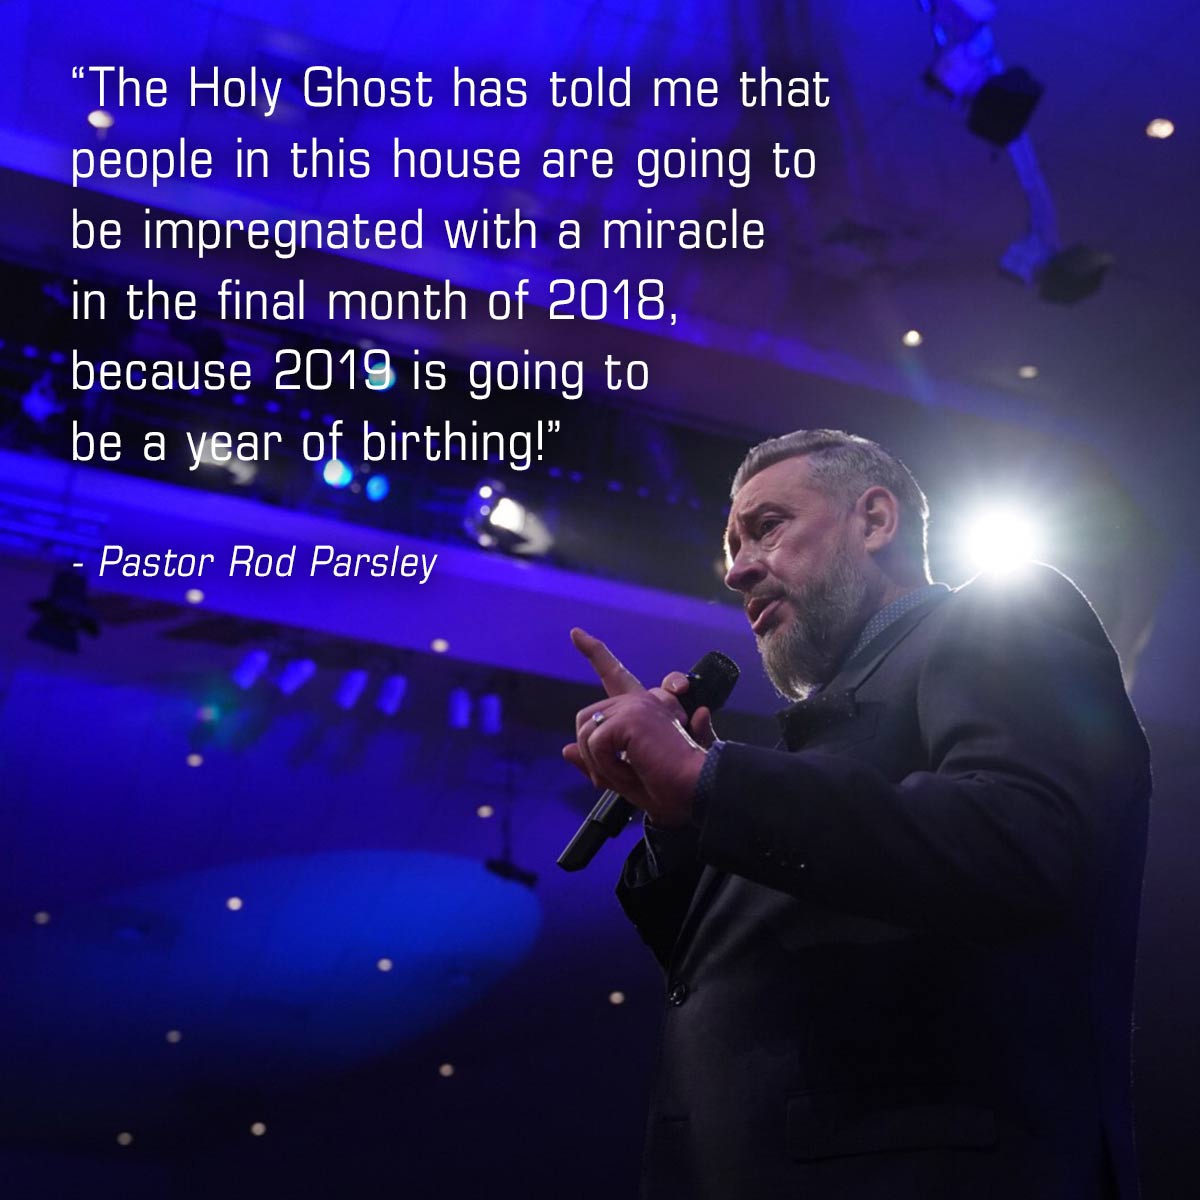 “The Holy Ghost has told me that people in this house are going to be impregnated with a miracle in the final month of 2018, because 2019 is going to be a year of birthing!” – Pastor Rod Parsley